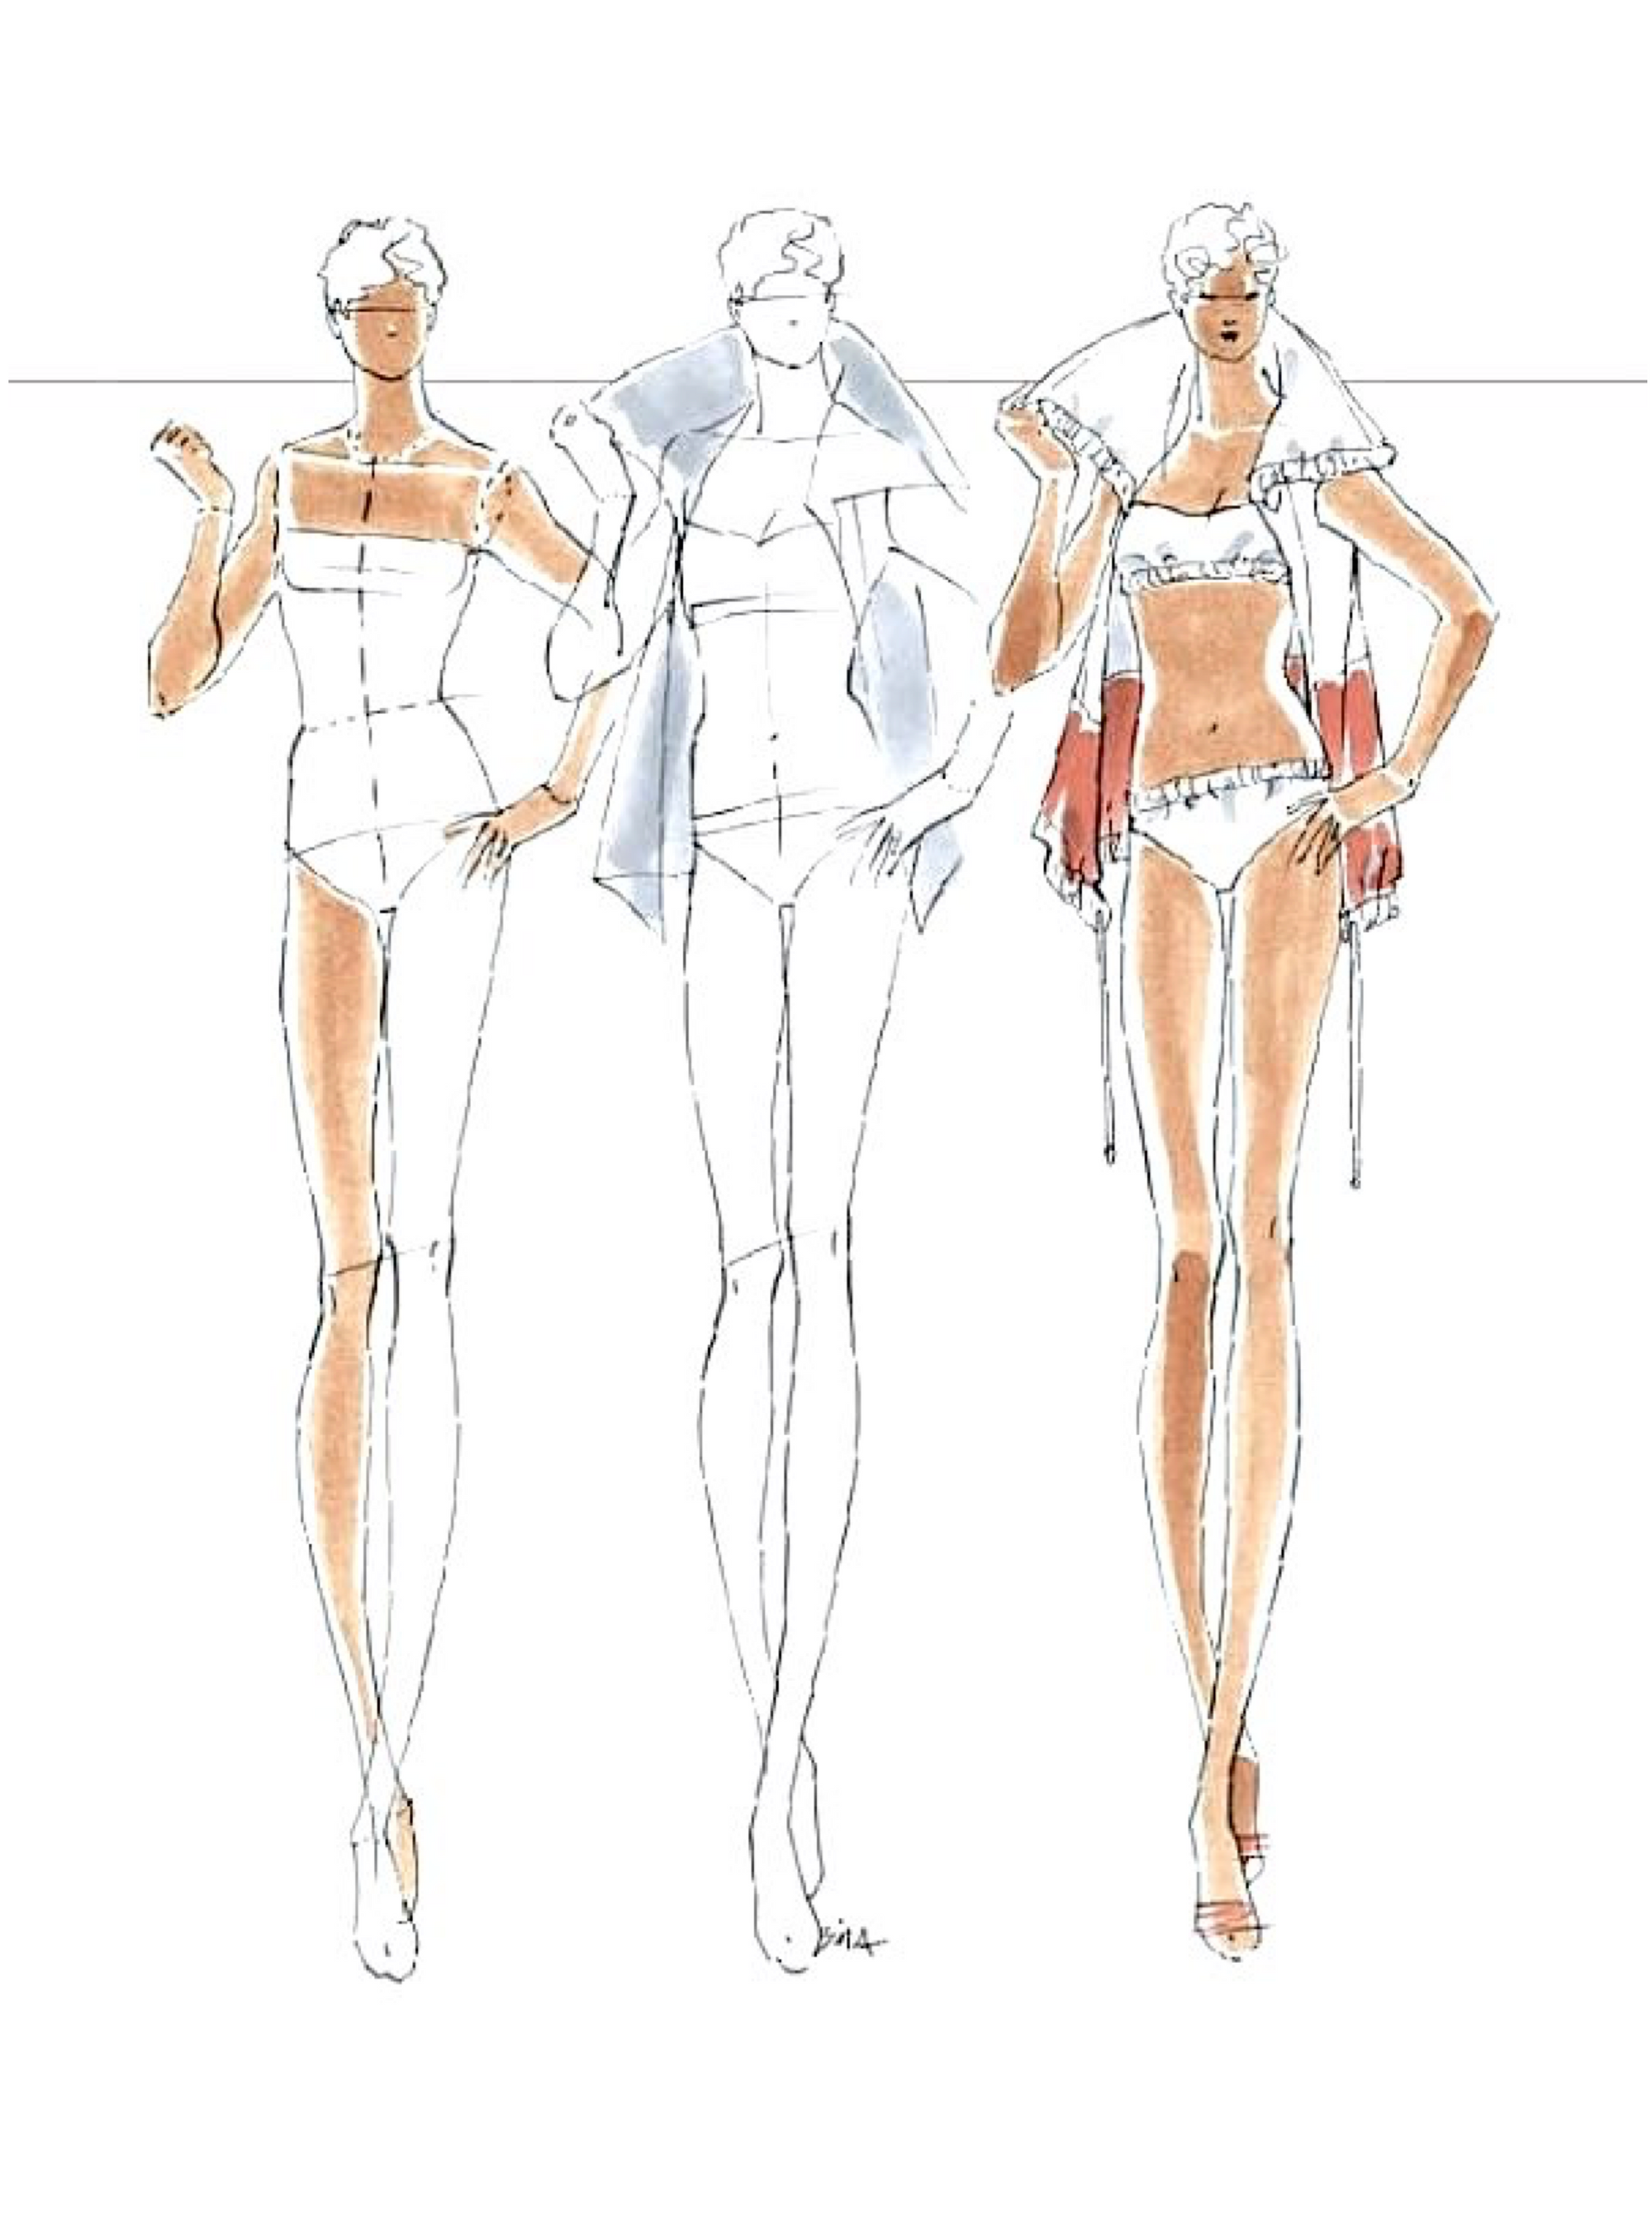 Buy Hand-drawn Fashion Croquis Pack updated, Female Fashion Figure  Template, Body Pose for Fashion Illustration, Fashion Sketch, Fashion Draw  Online in India - Etsy